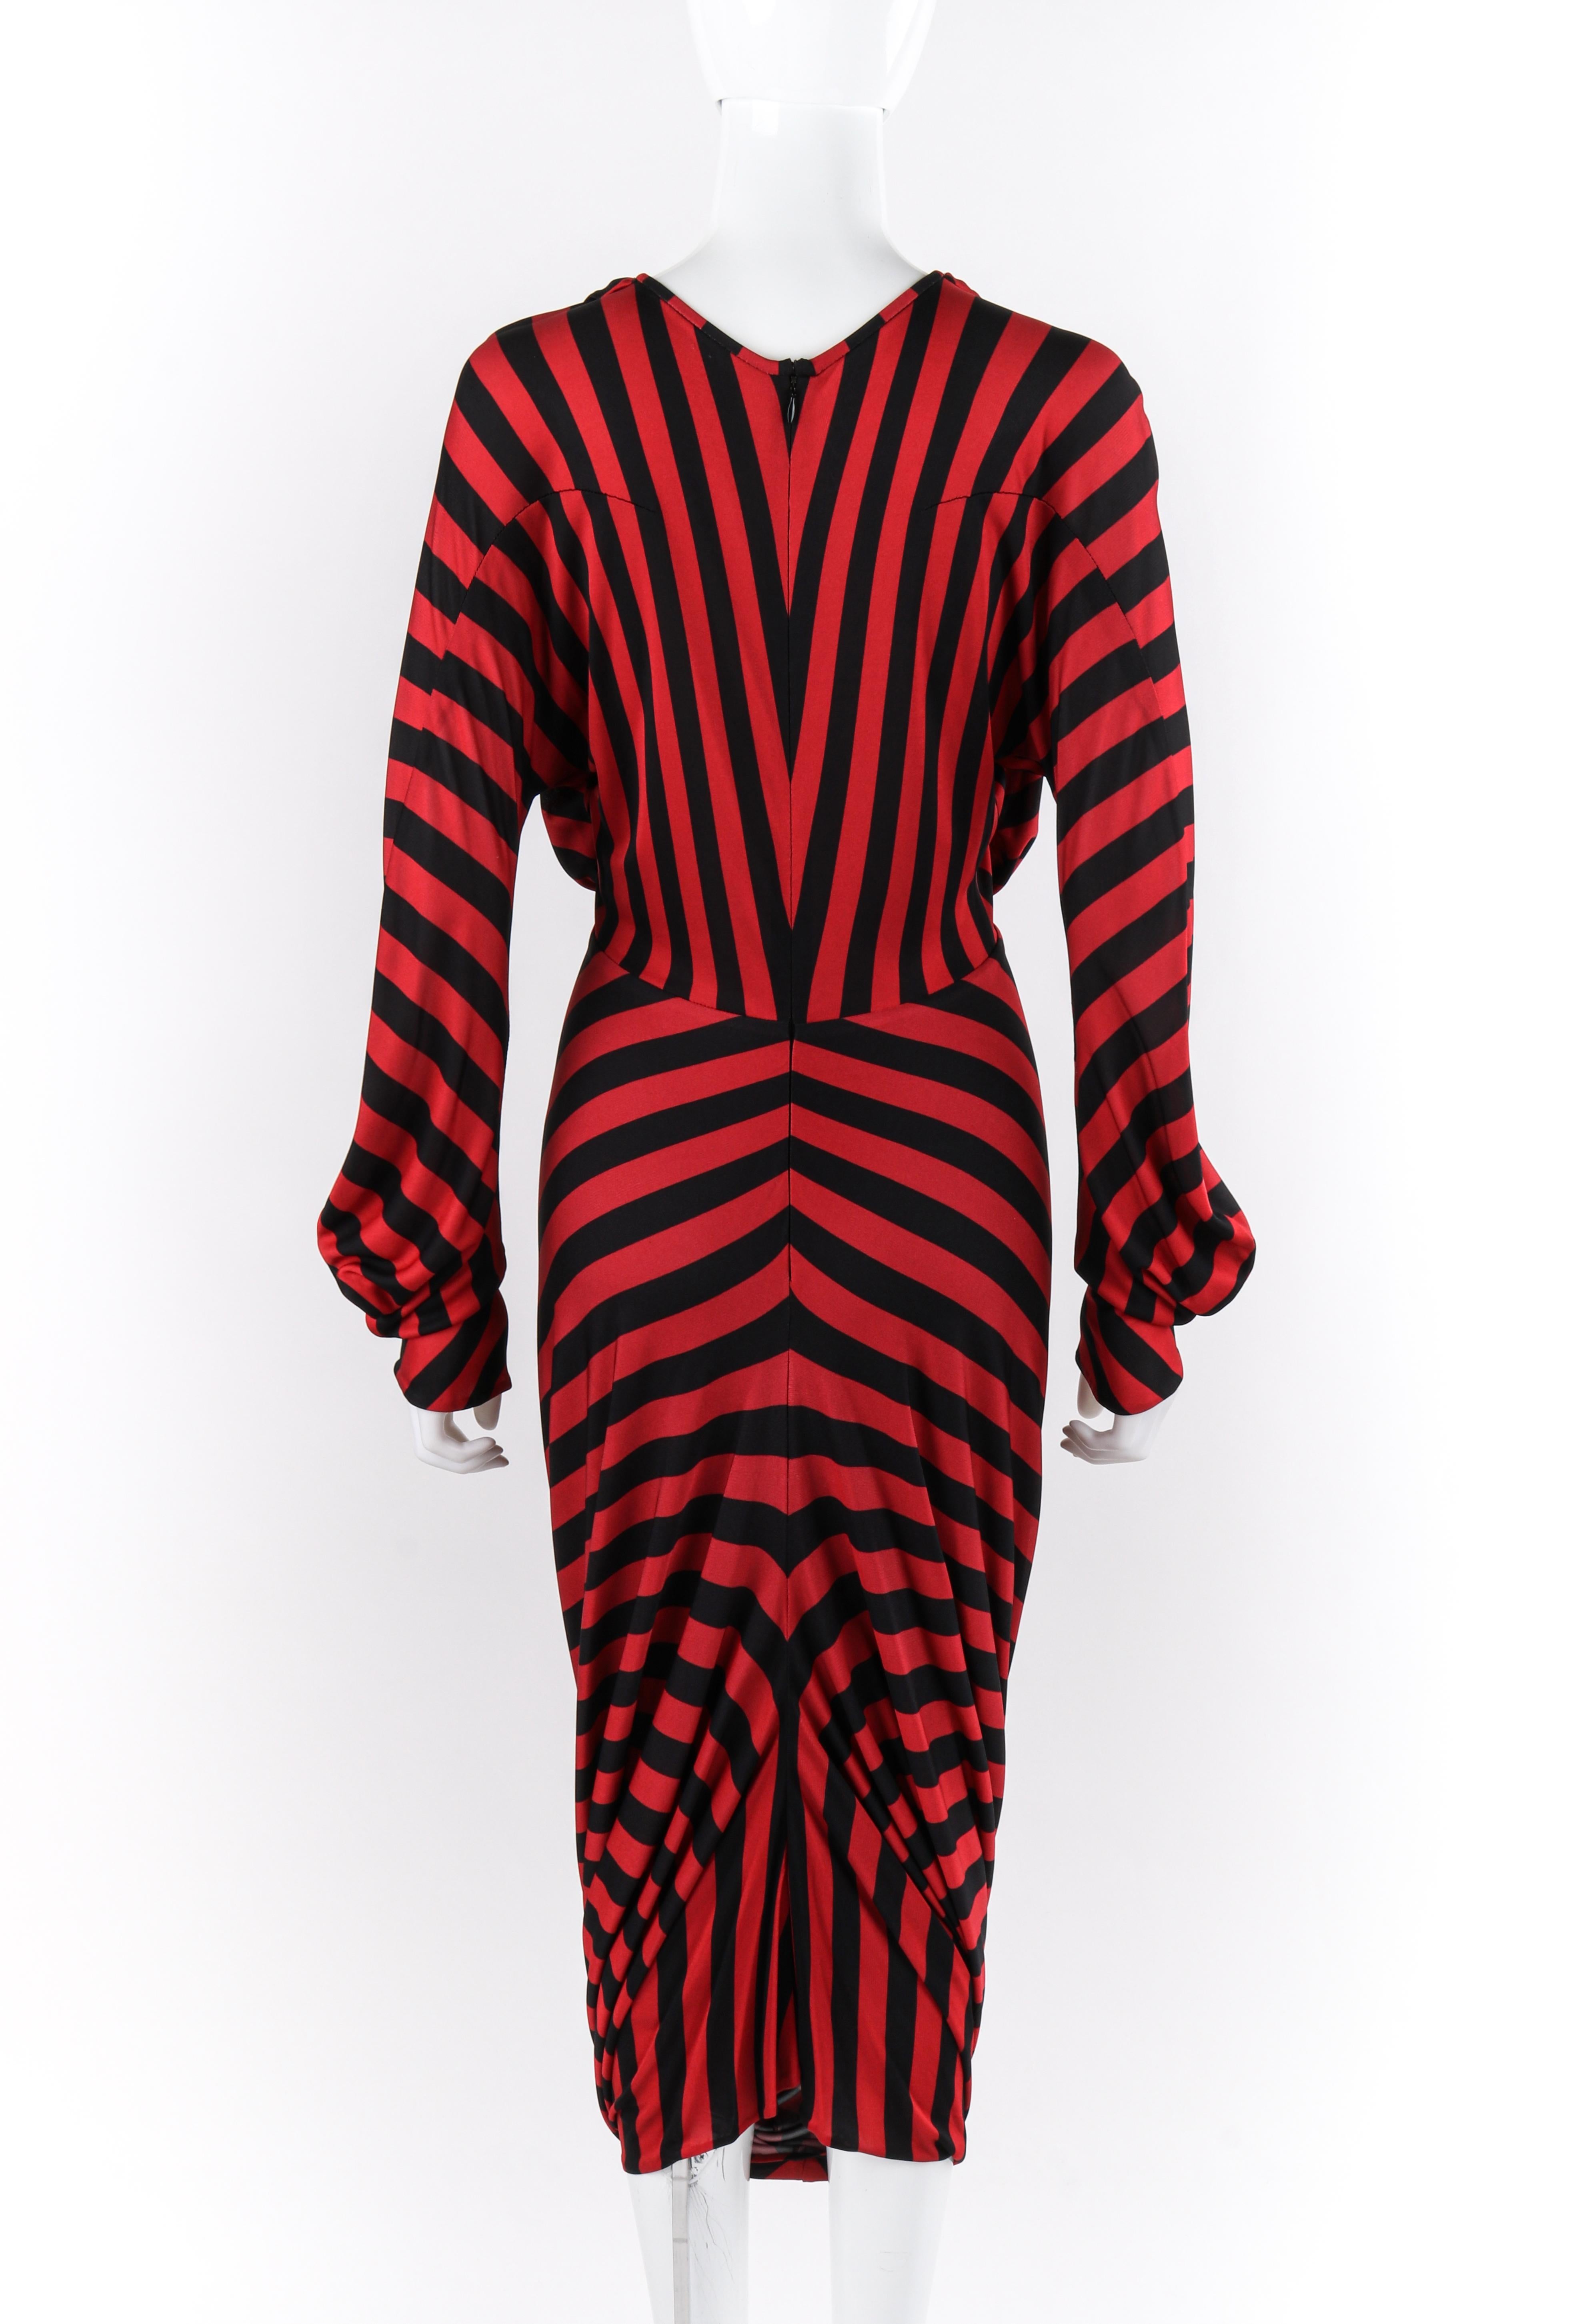 Women's ALEXANDER McQUEEN F/W 2009 “The Horn of Plenty” Red Black Chevron Ruched Dress For Sale